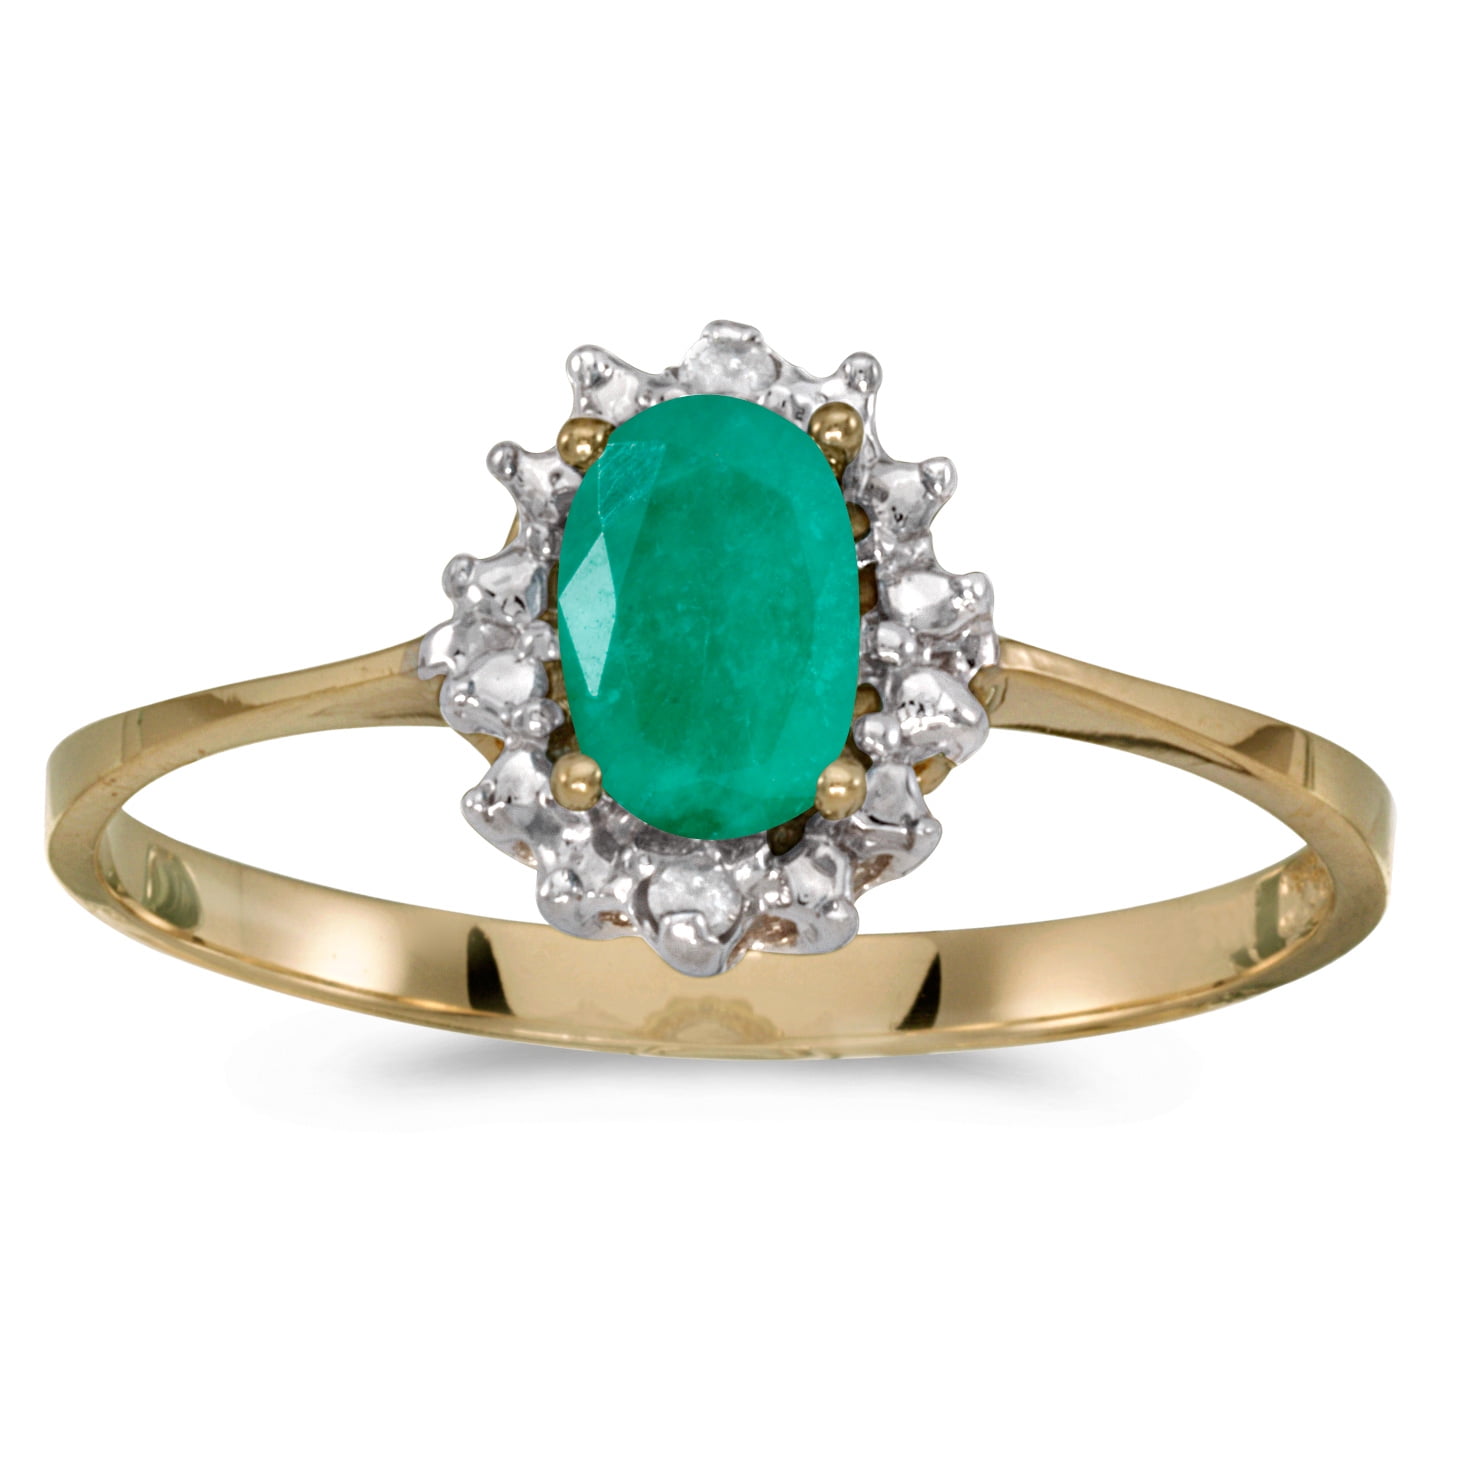 10k White Gold Oval Emerald Ring